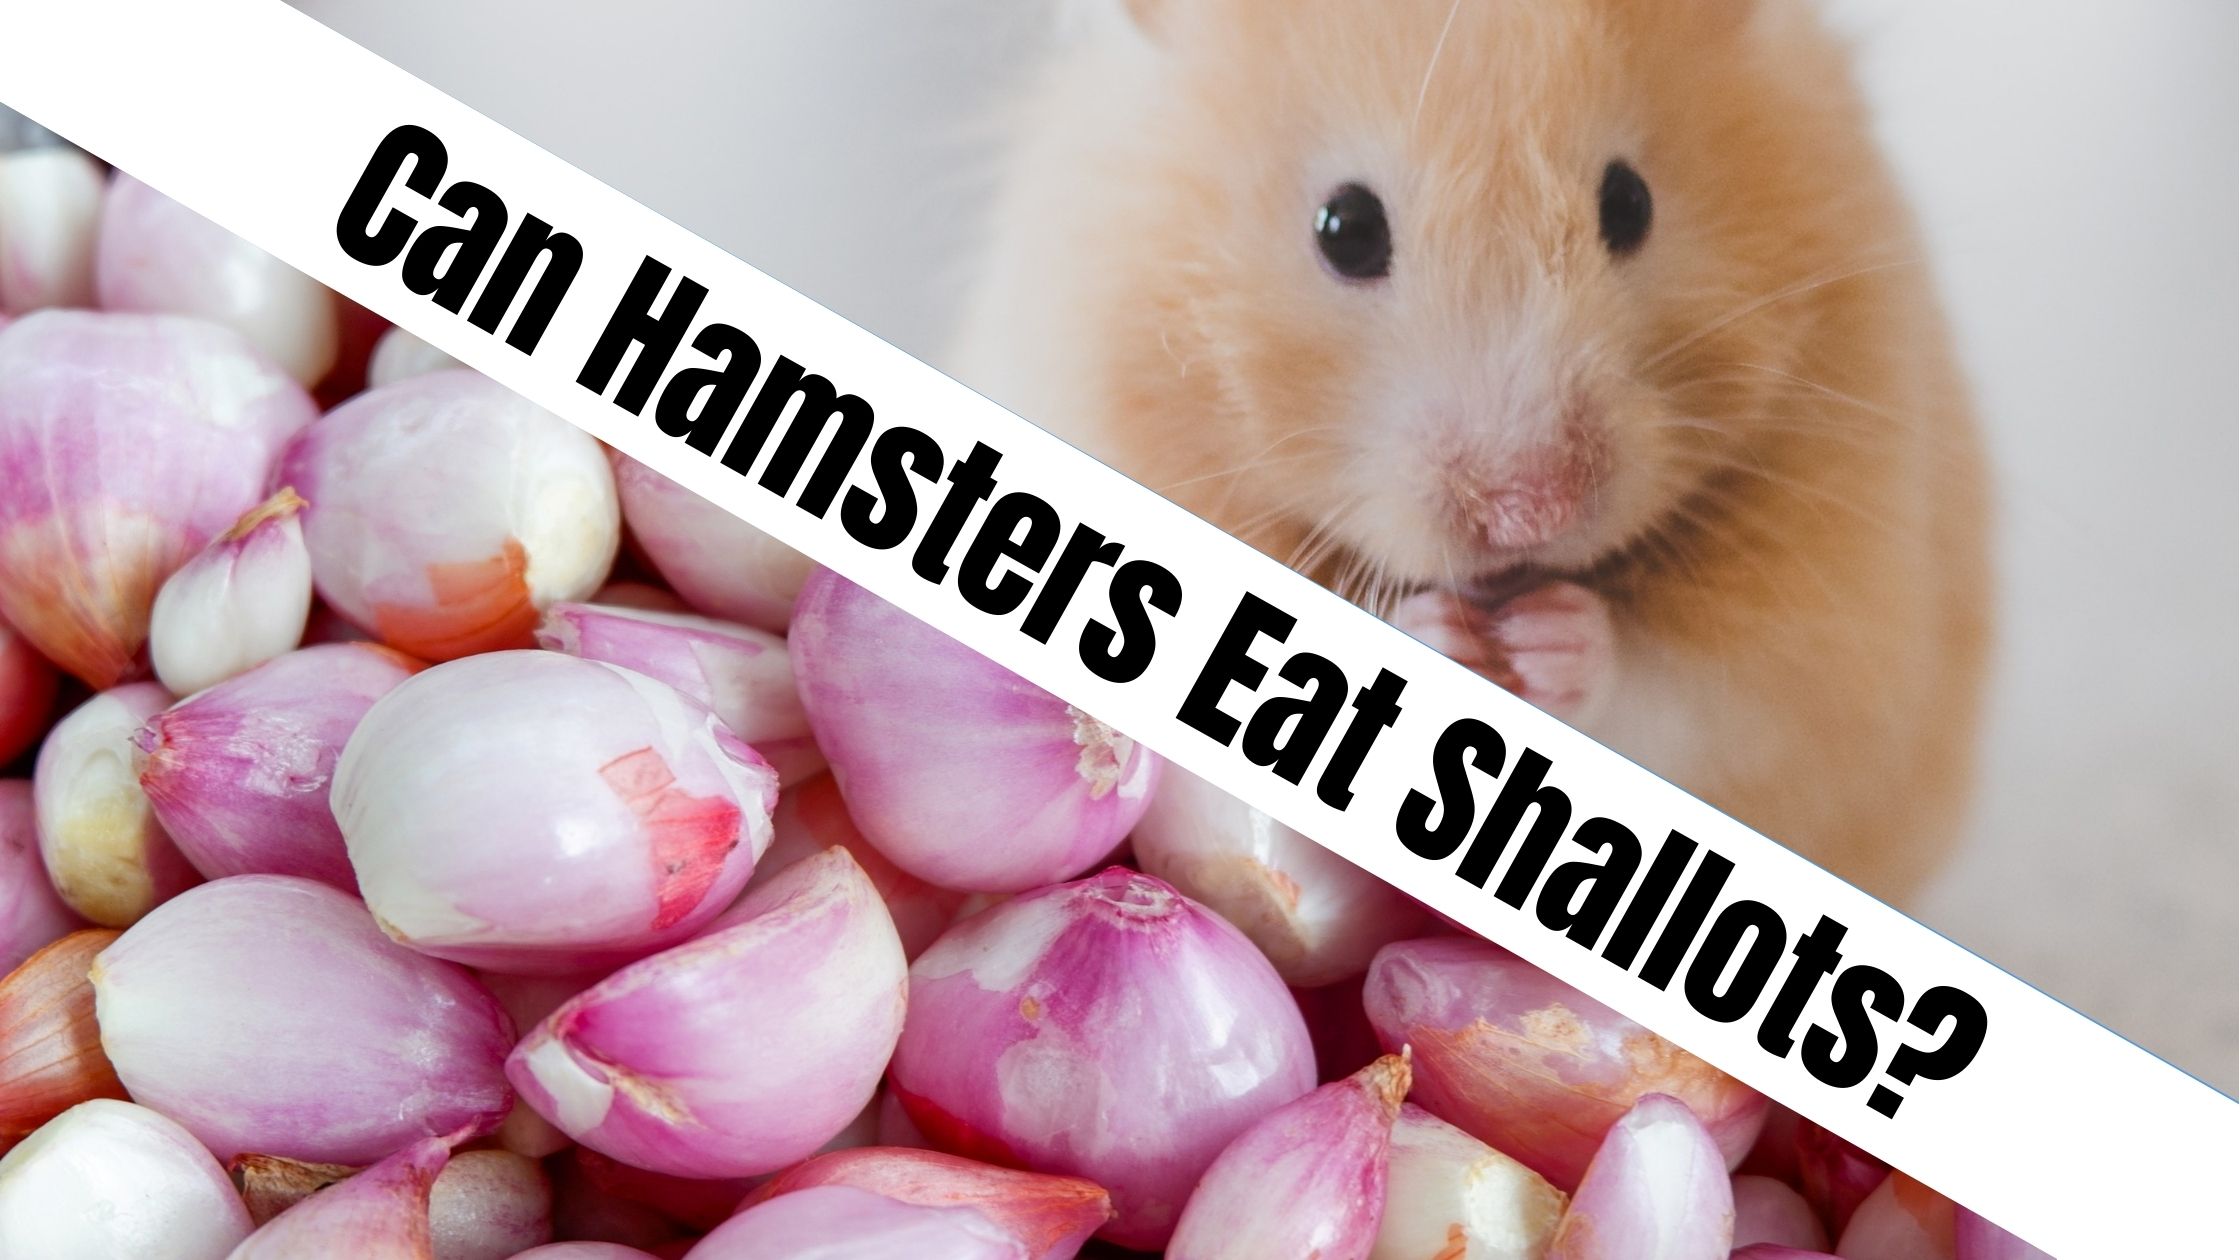 Can Hamsters Eat Shallots?